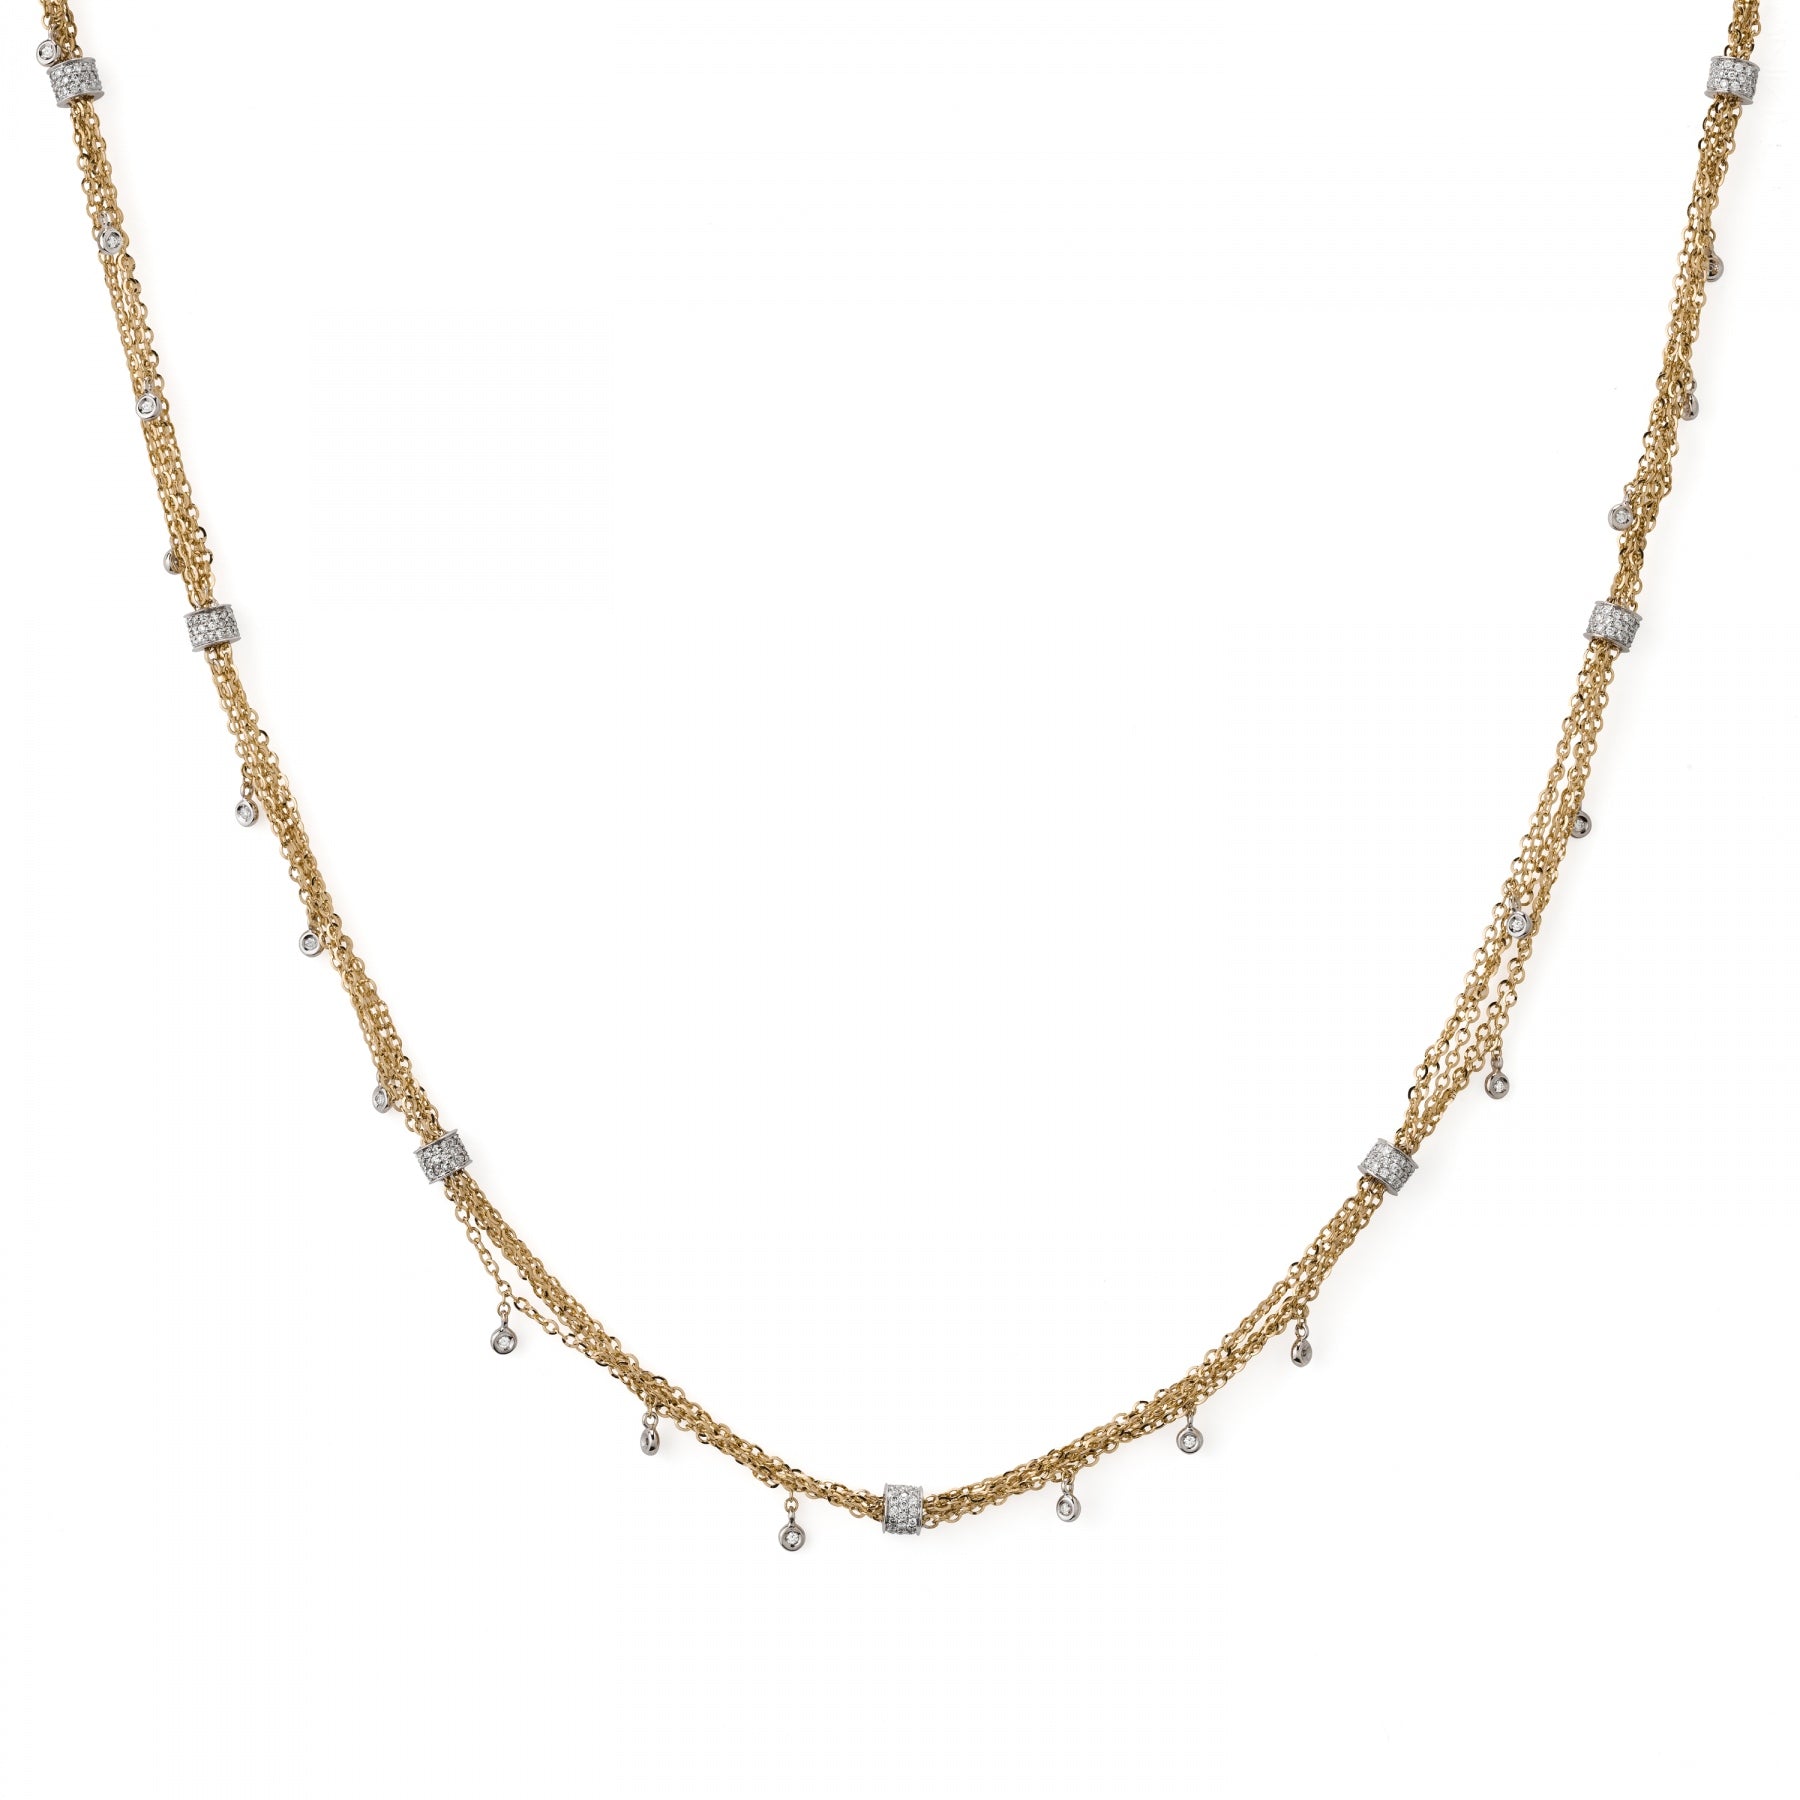 Yellow gold Cascata necklace